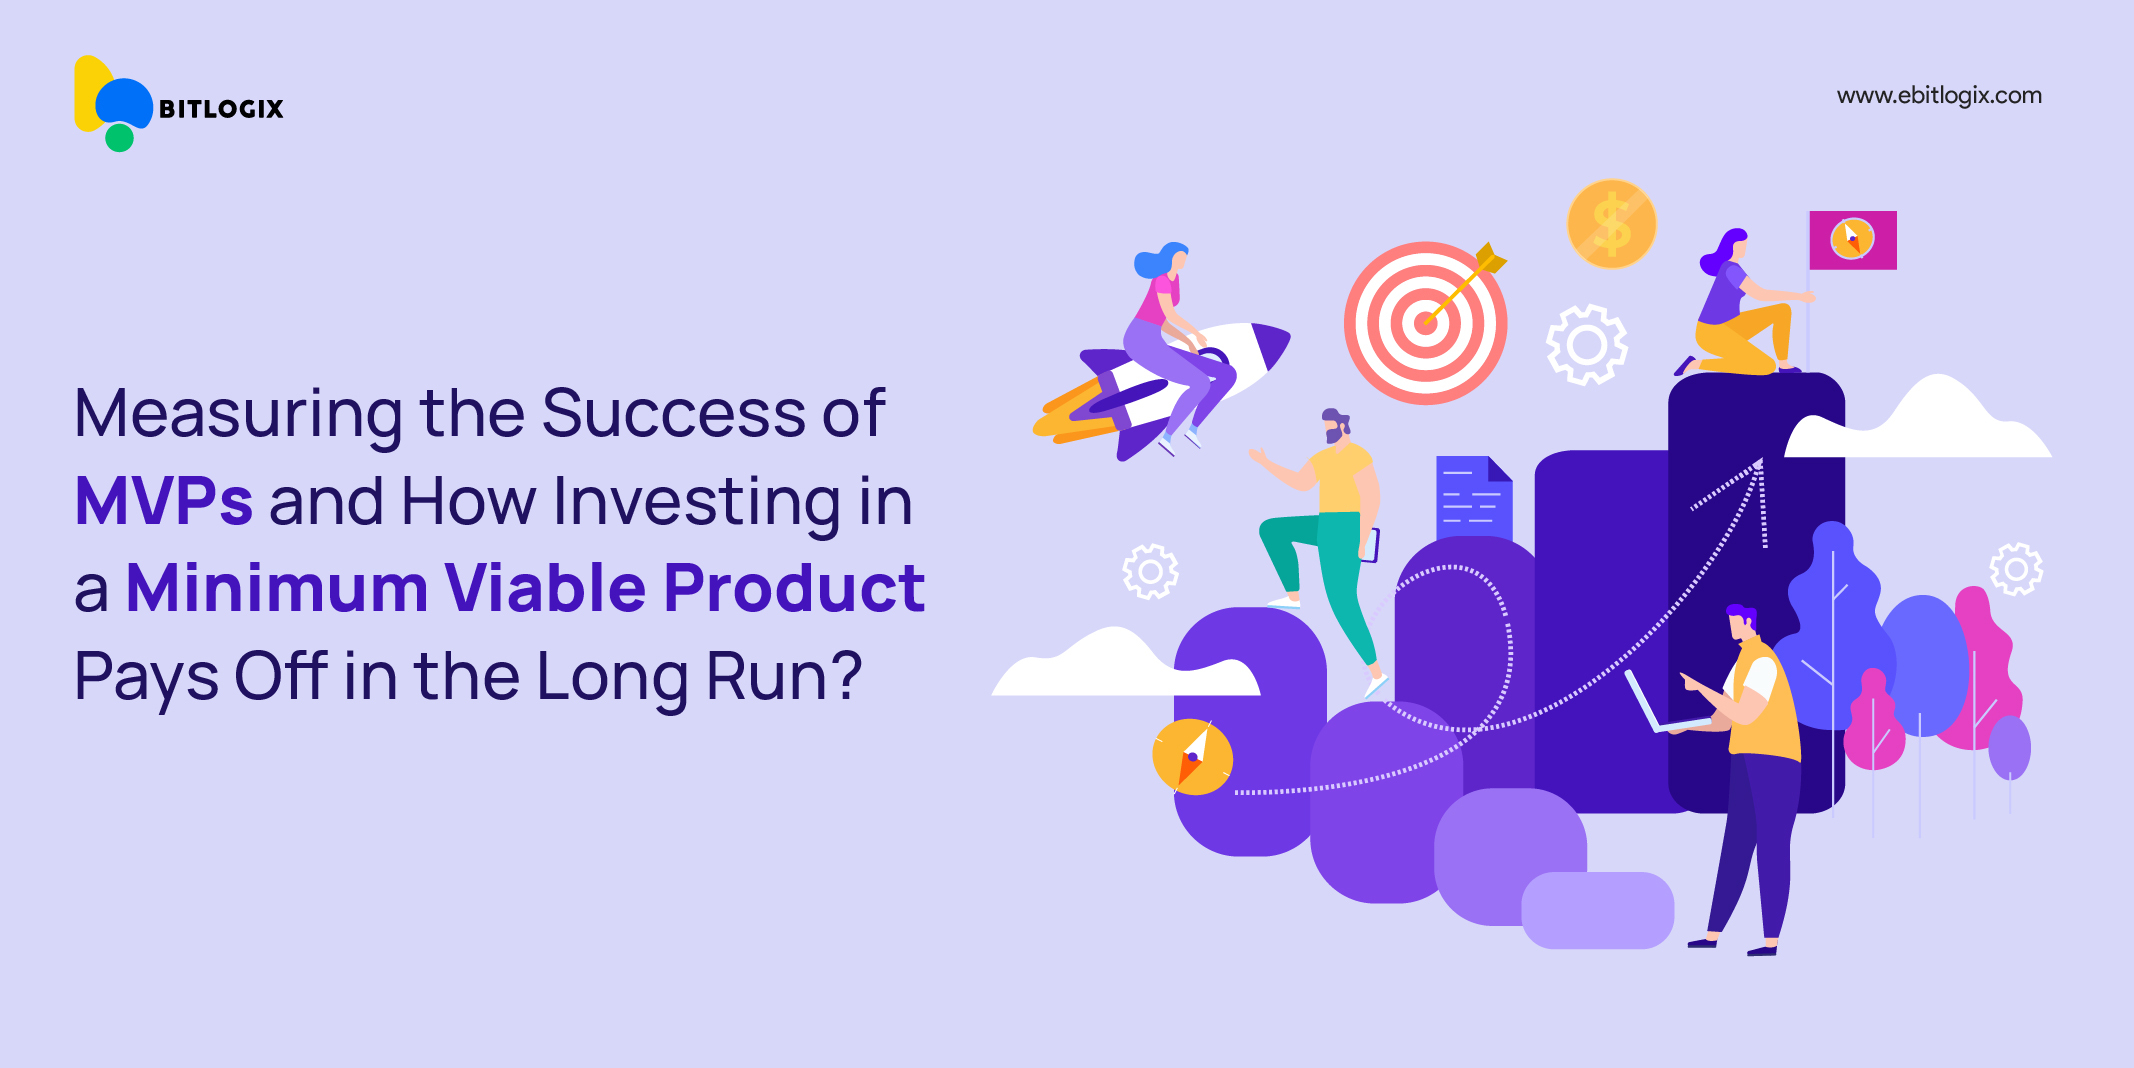 Measuring the Success of MVPs and How Investing in a Minimum Viable Product Pays Off in The Long Run?